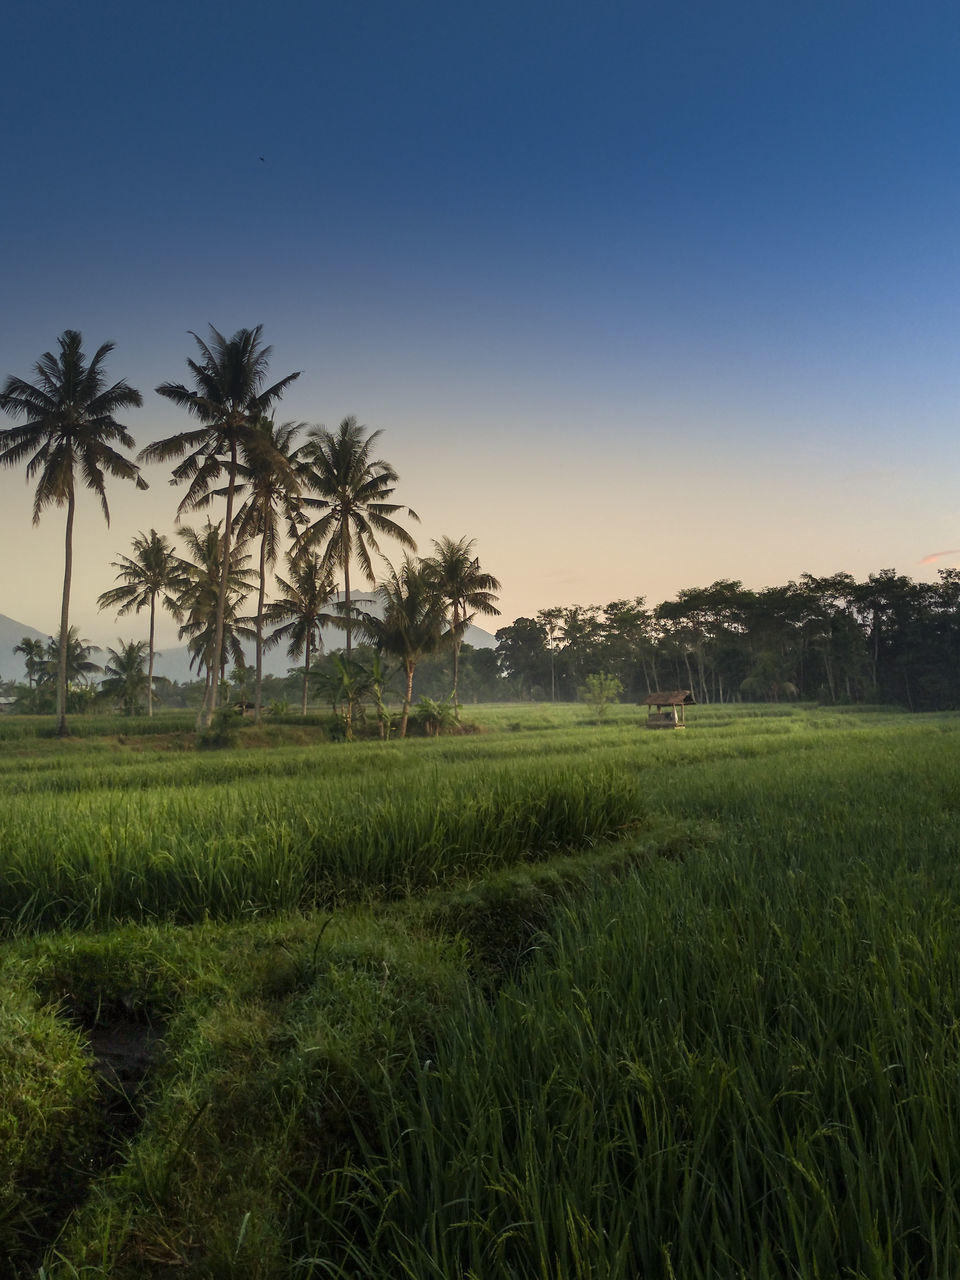 plant, landscape, environment, tree, sky, land, grass, nature, field, palm tree, tropical climate, paddy field, agriculture, horizon, natural environment, scenics - nature, beauty in nature, crop, plain, rural scene, growth, rice, green, no people, rice paddy, sunset, rural area, tranquility, outdoors, coconut palm tree, social issues, food and drink, blue, farm, cloud, clear sky, food, sunlight, travel, tranquil scene, travel destinations, cereal plant, environmental conservation, hill, leaf, grassland, prairie, flower, twilight, savanna